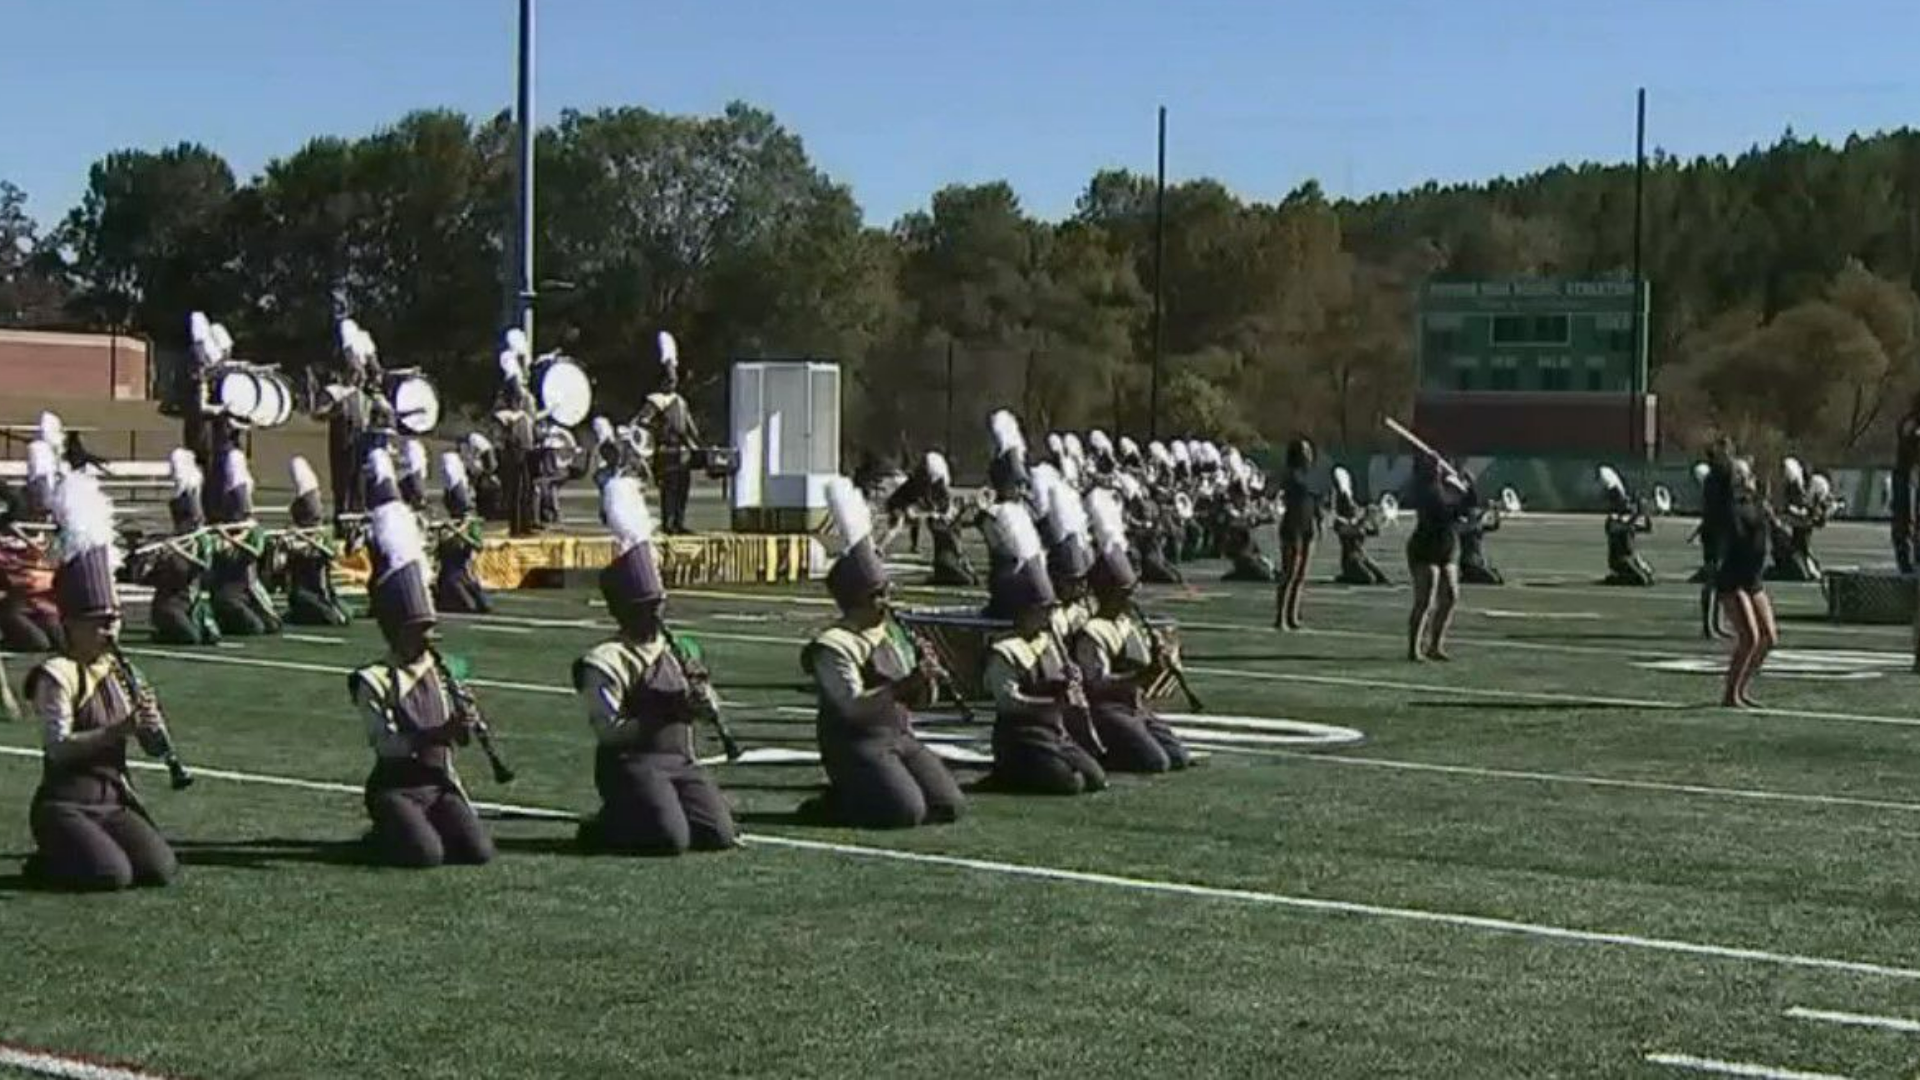 Marching Band Porn Captions - NE Ga bands to march in New Year's Parade in London â€“ WGAU